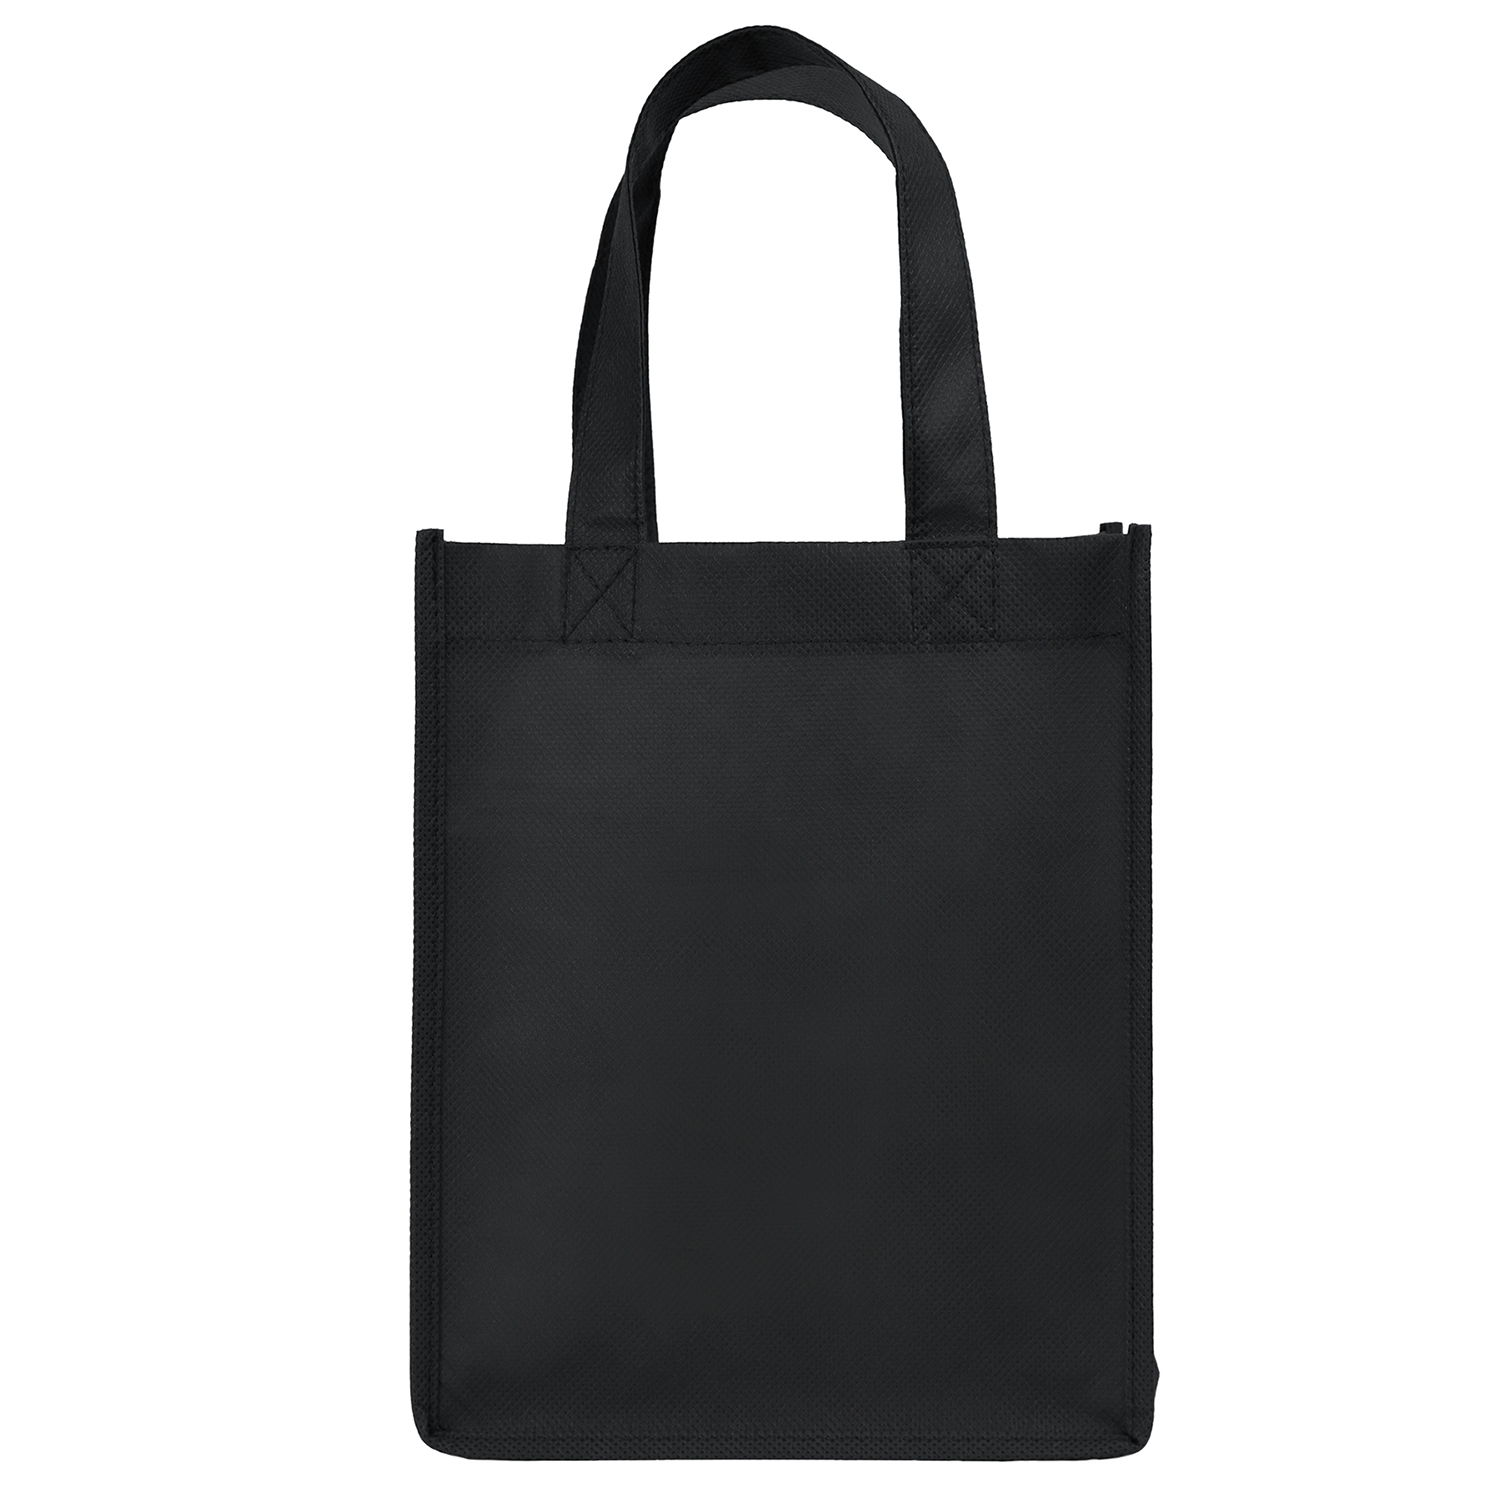 Bag Makers CVPS810 - Custom Printed Eco-Friendly Promotional Non-Woven Grocery Tote Bag